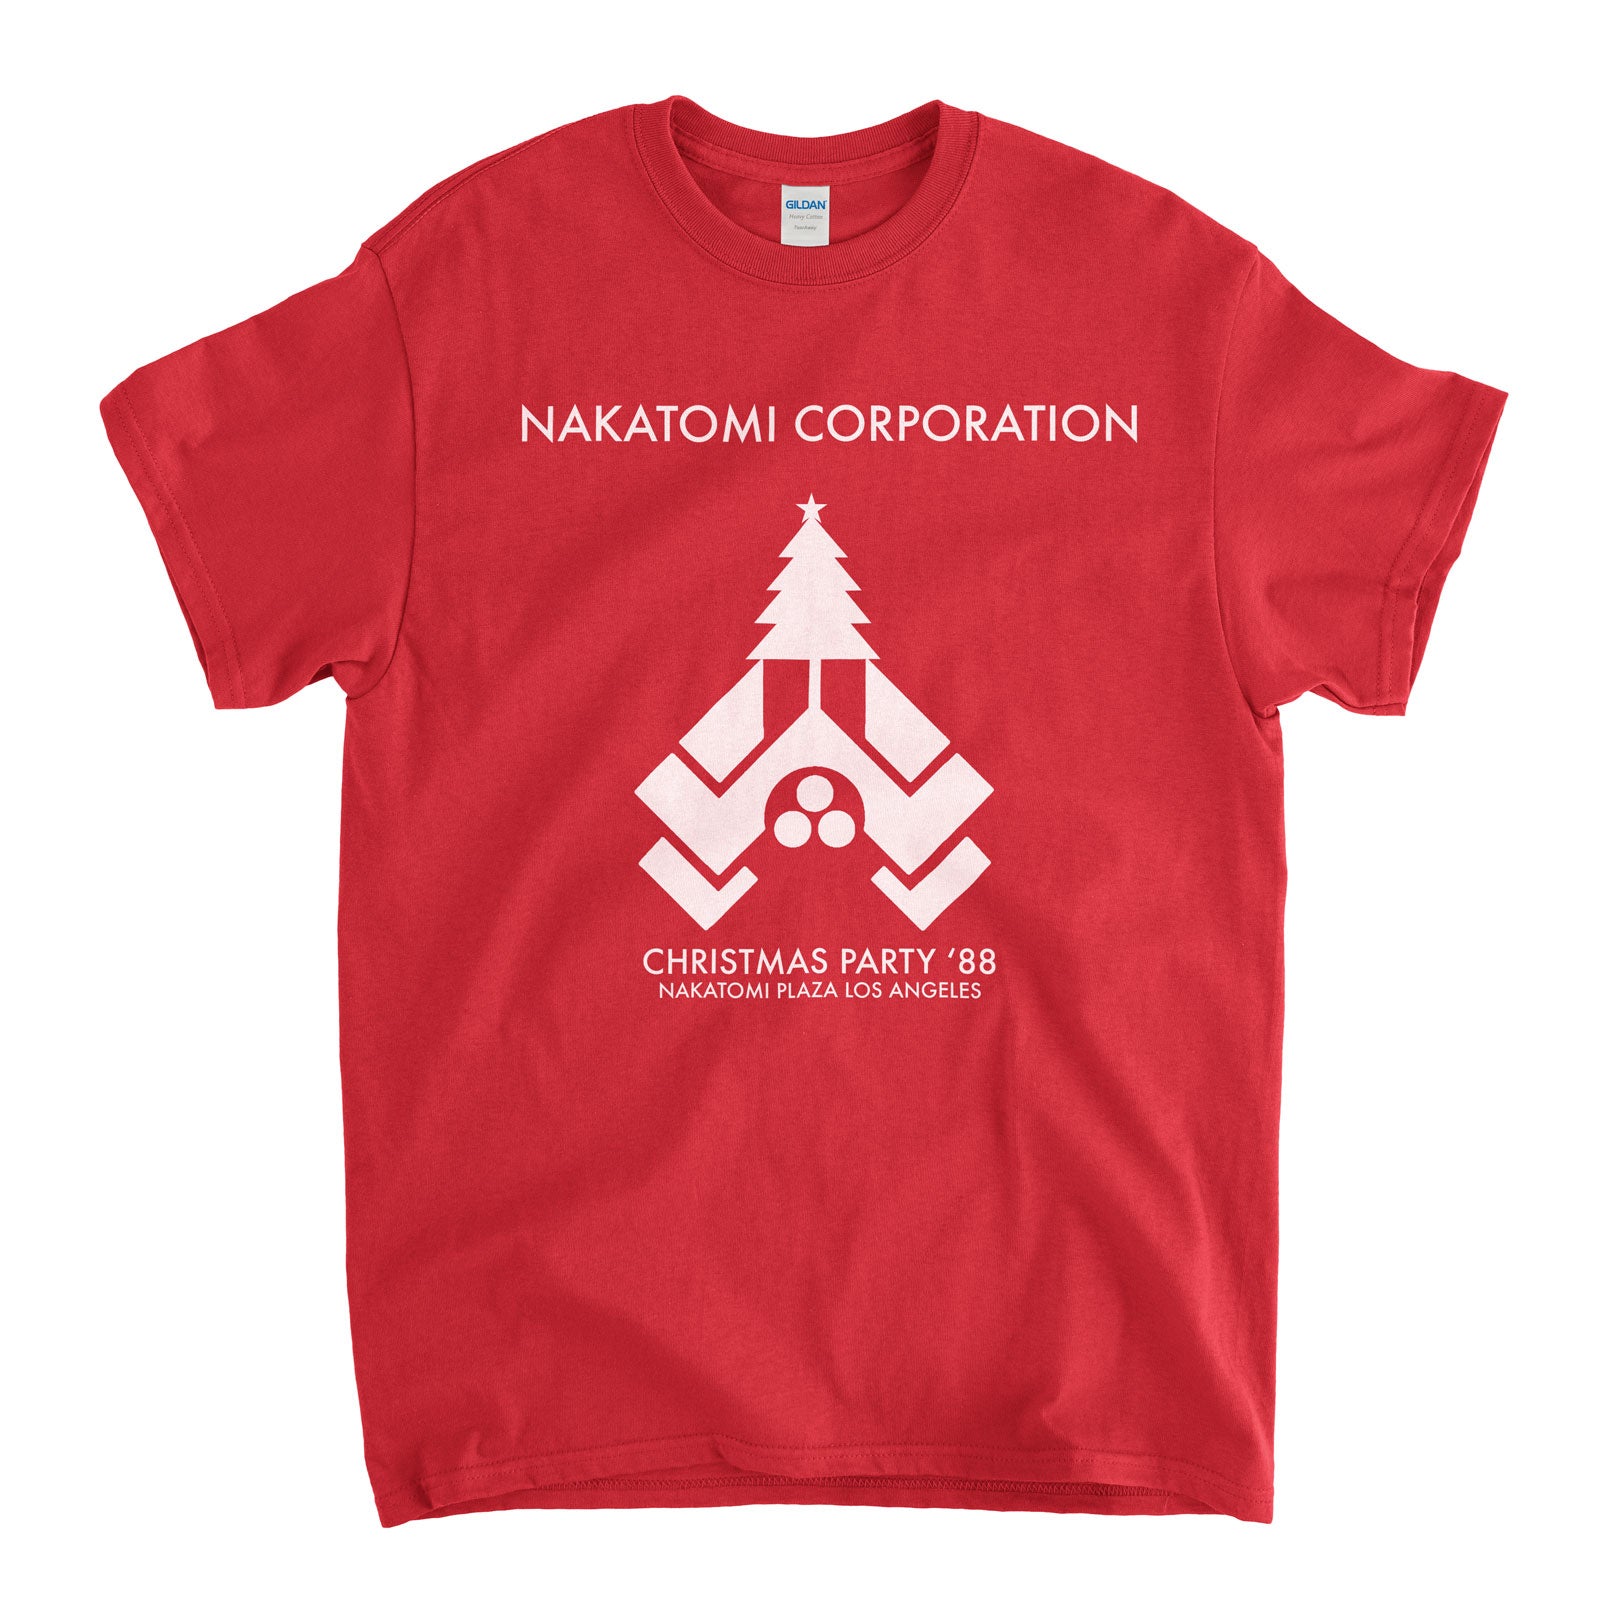 Inspired by Die Hard T Shirt - Nakatomi Corporation Christmas Party '88